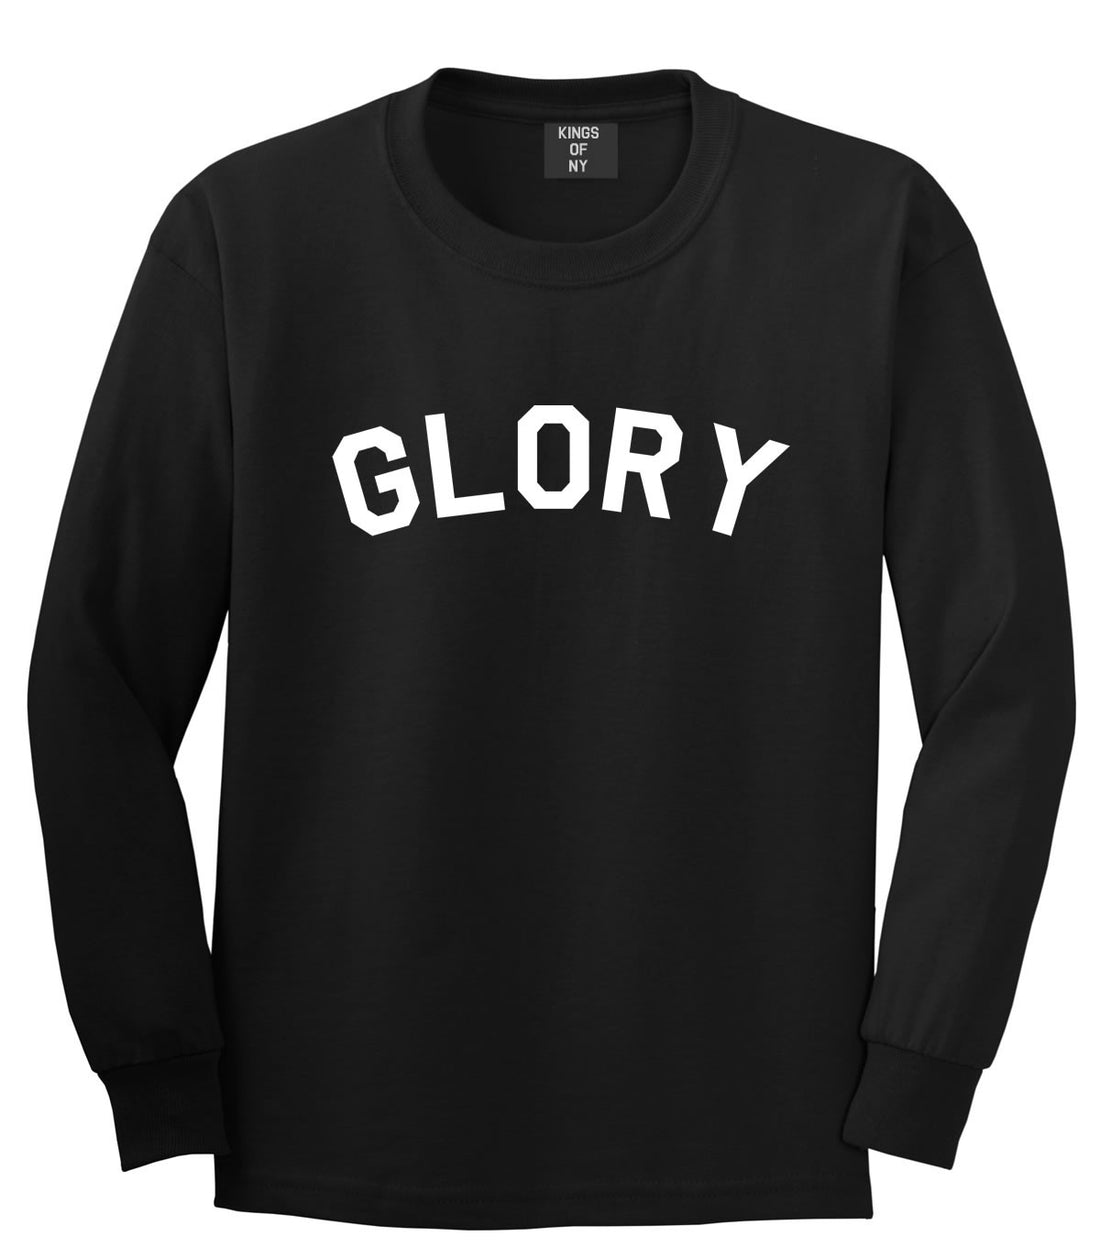 GLORY New York Champs Jersey Long Sleeve T-Shirt in Black